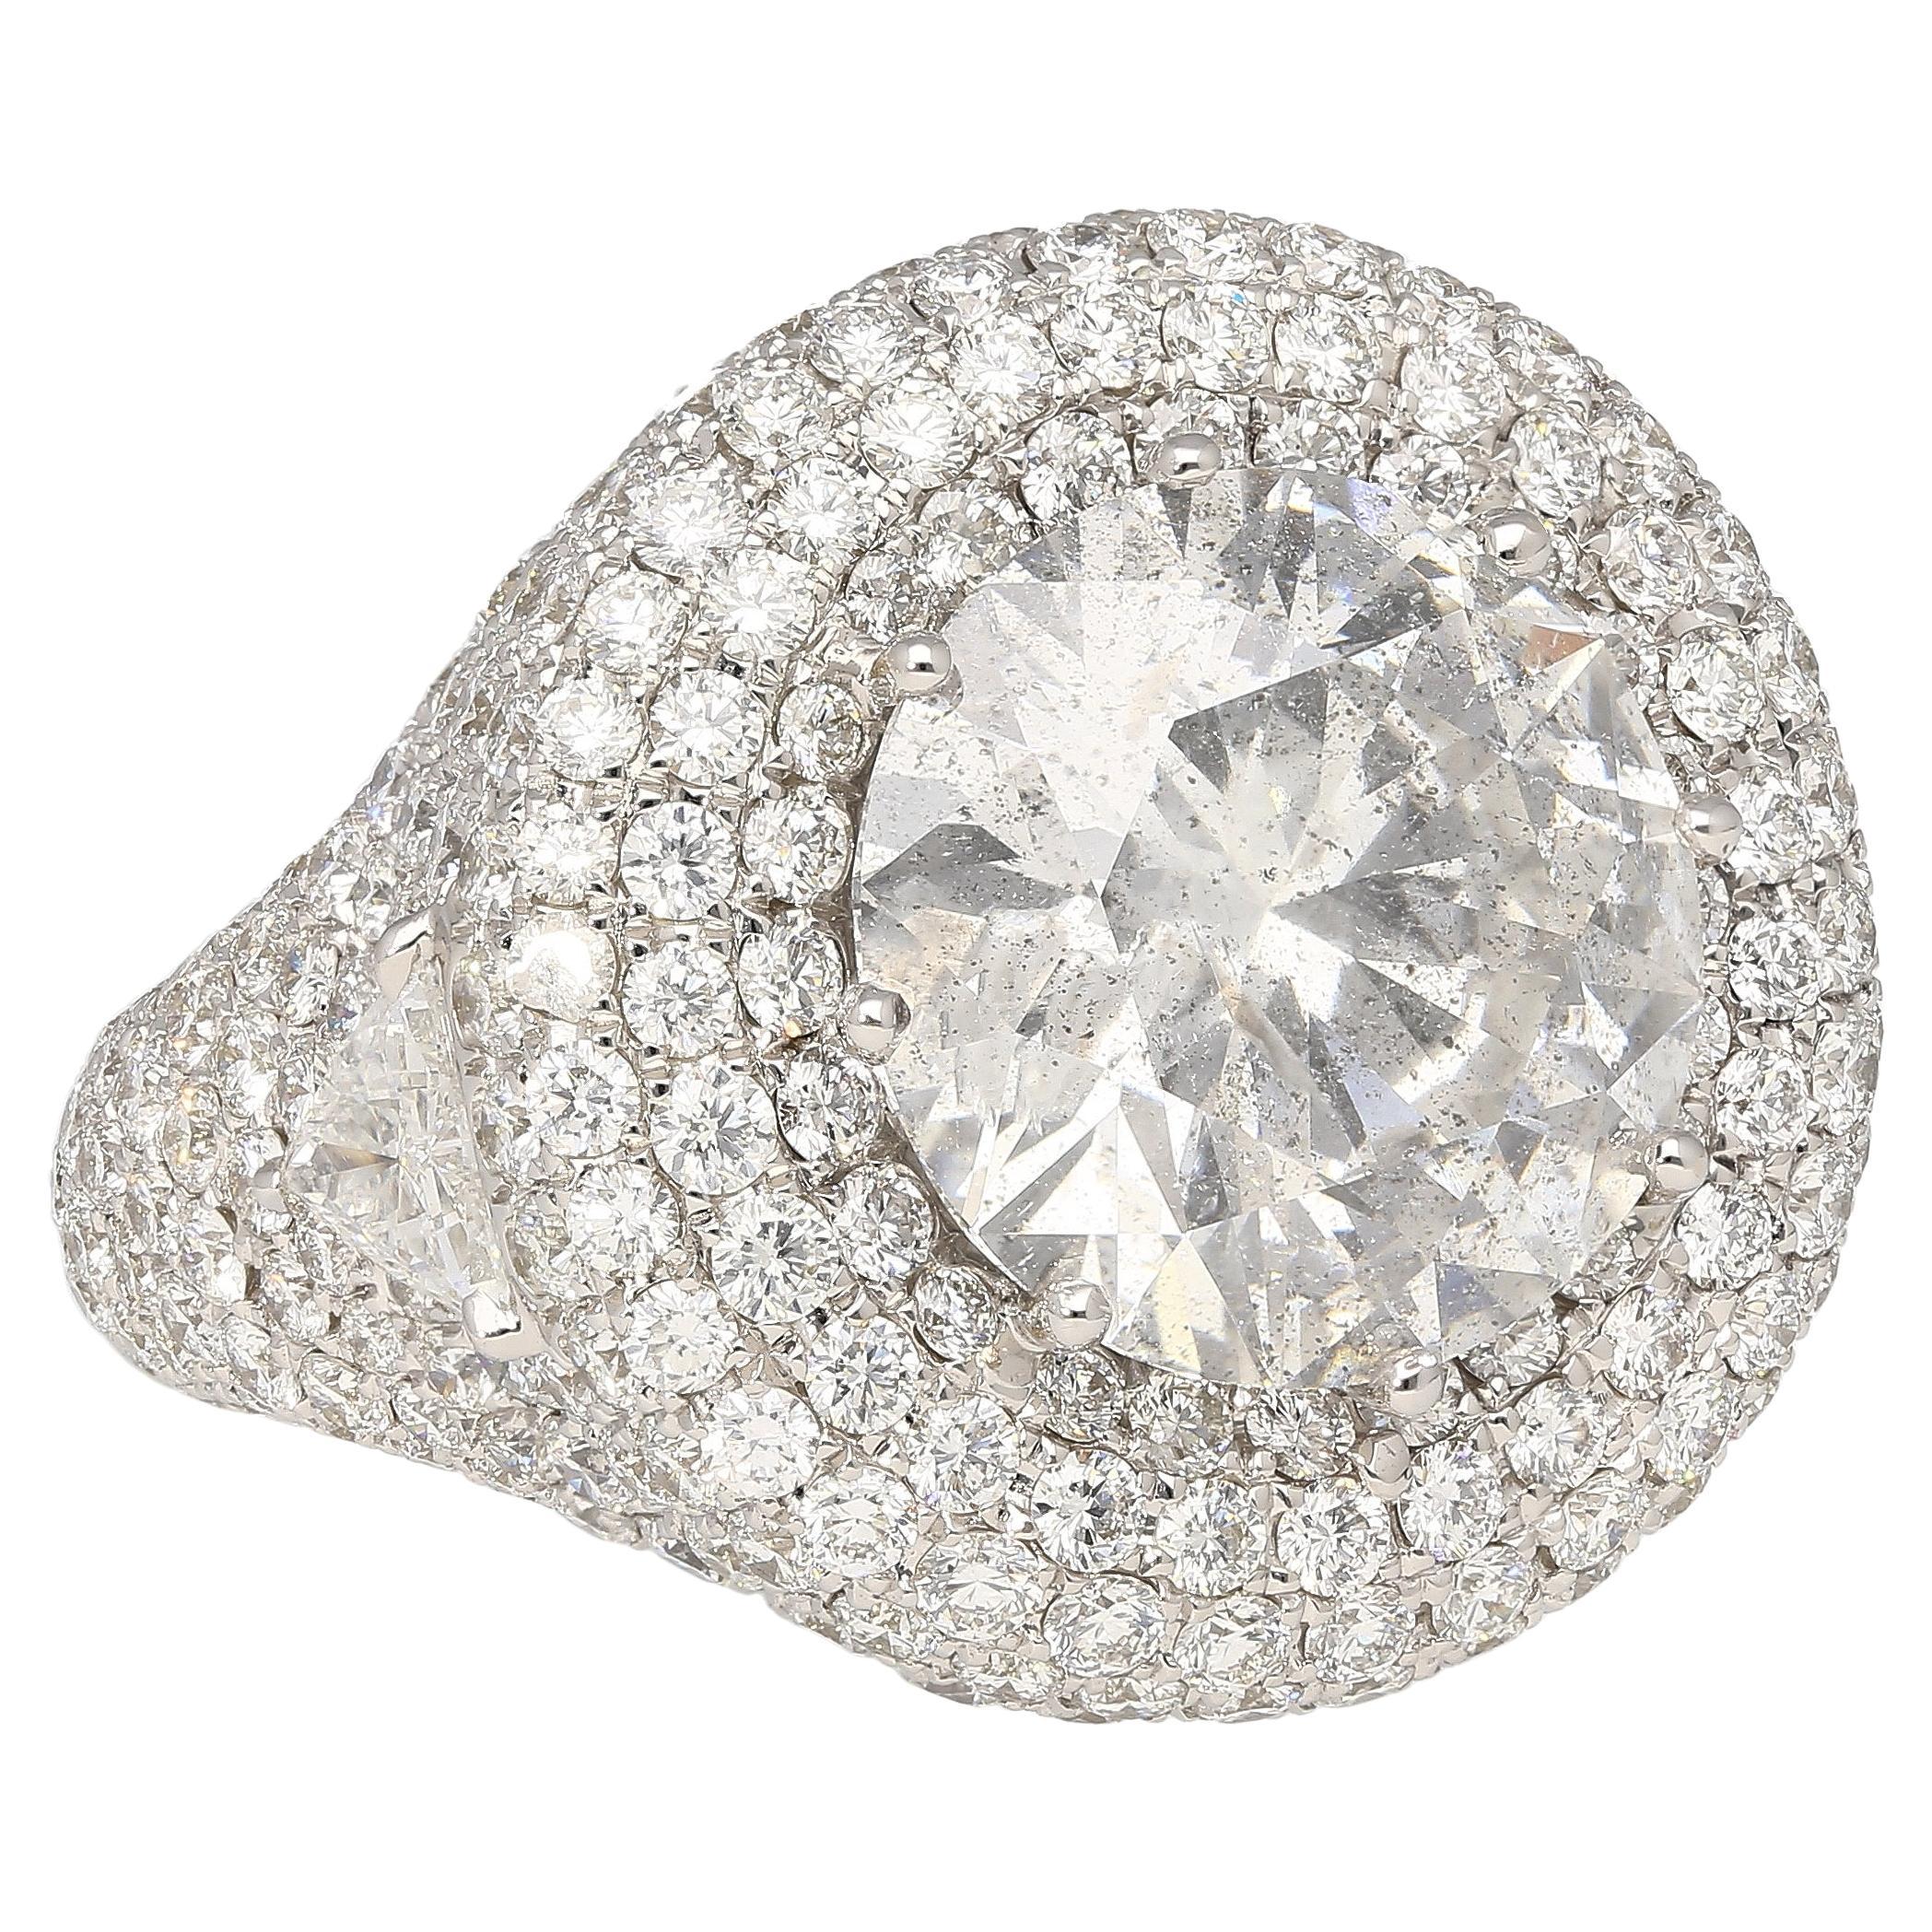 7.71 Carat Round Cut Natural Diamond Pave Cluster Ring in 18K White Gold